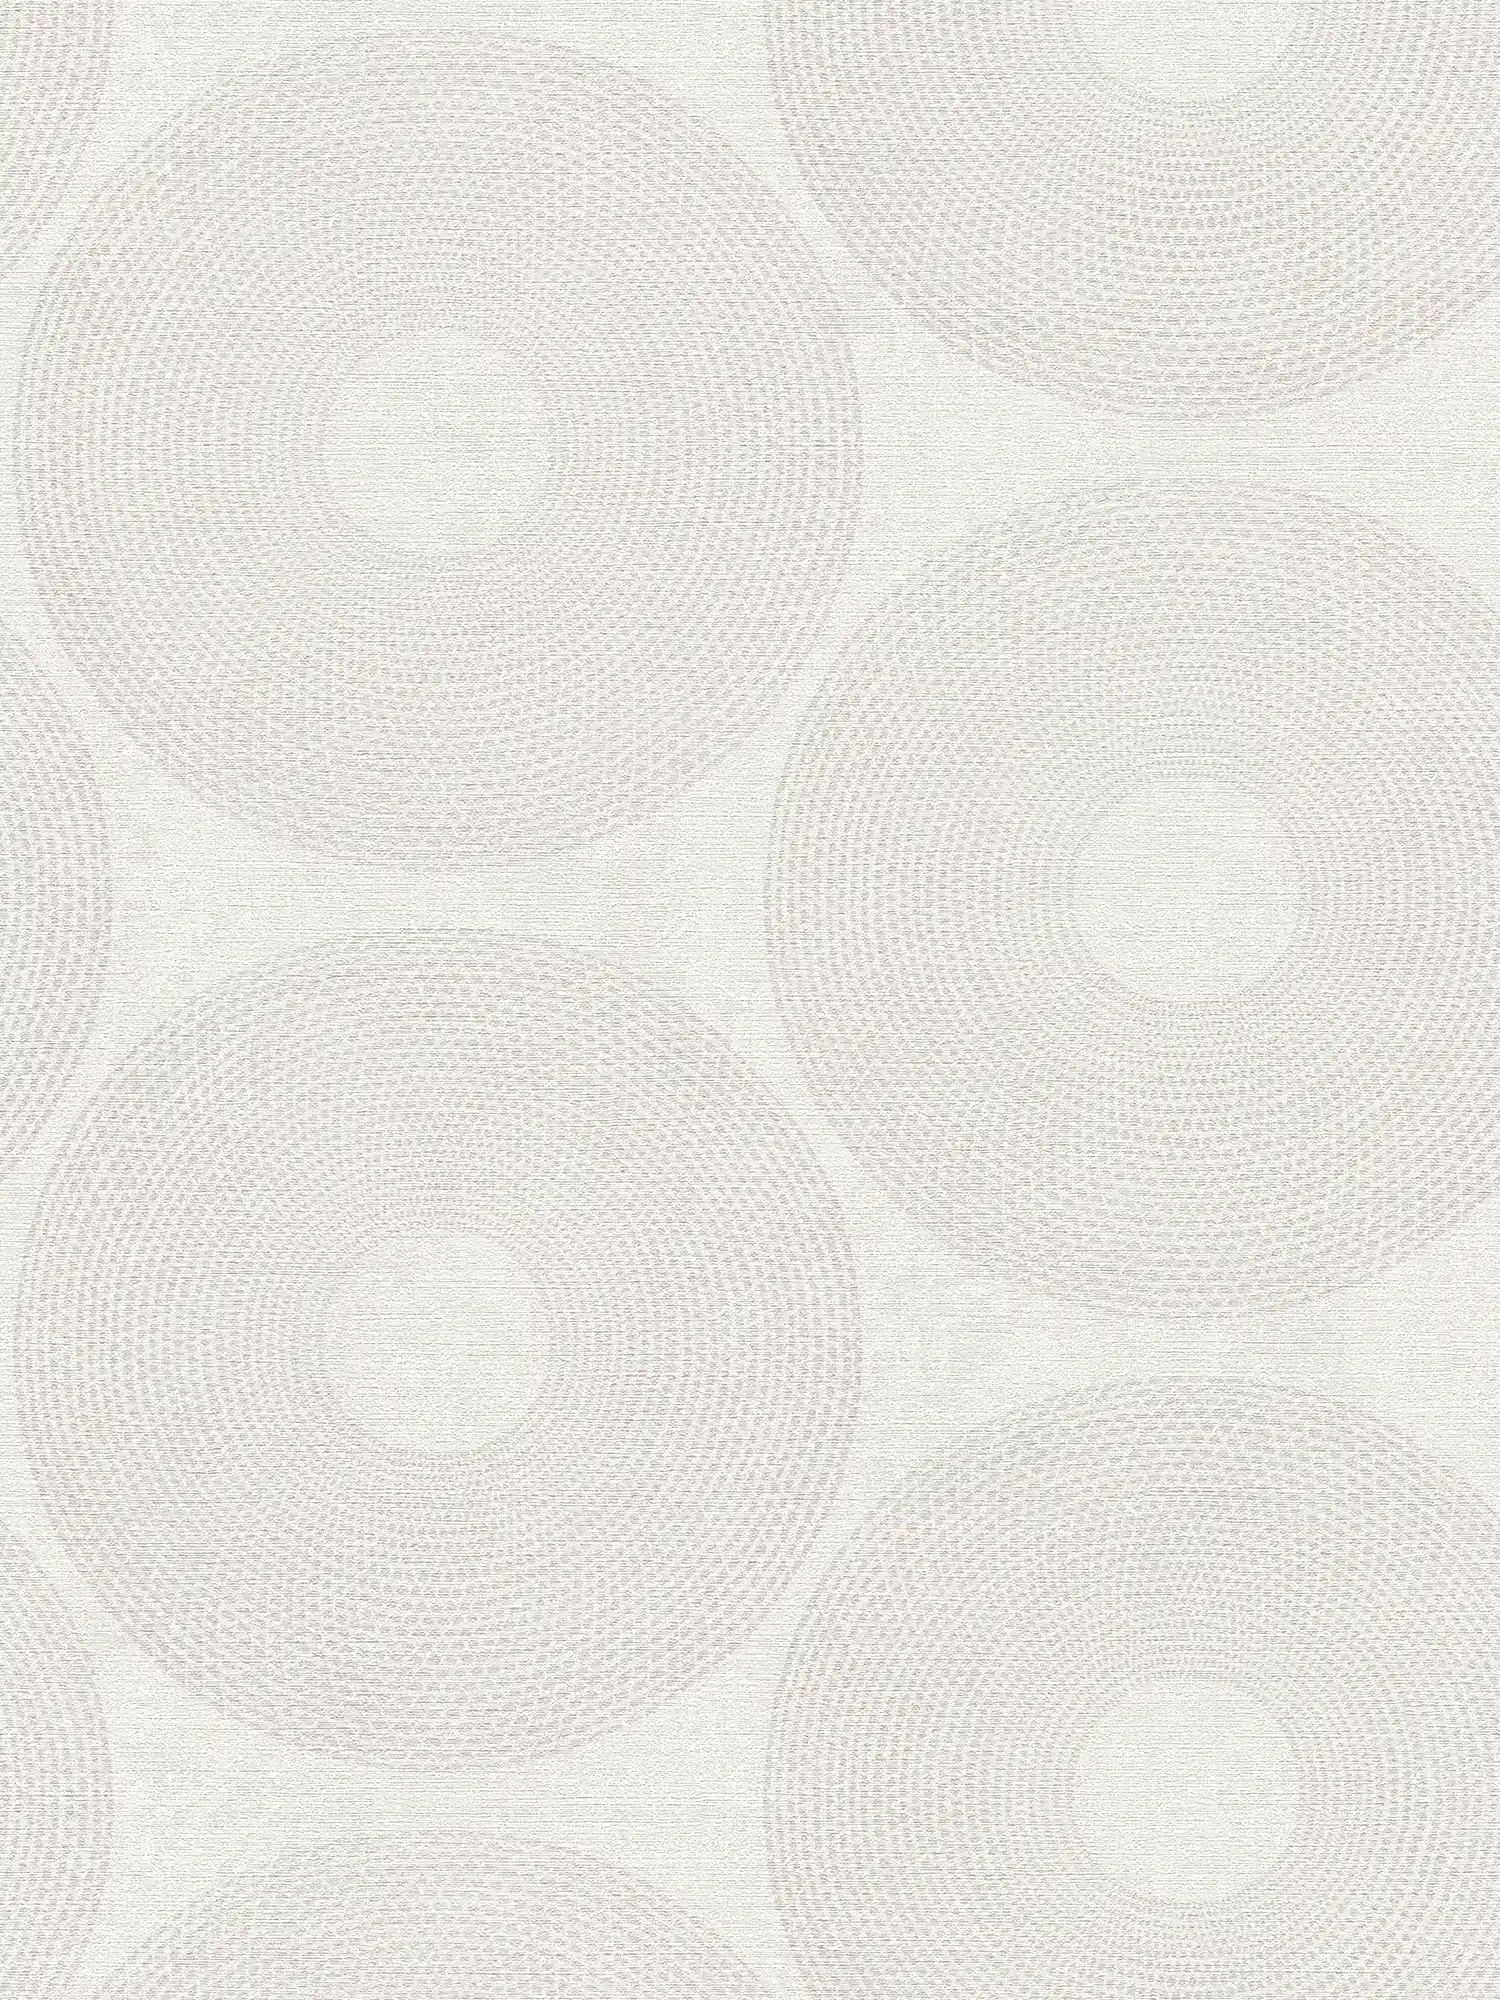 Ethno wallpaper circles with structure design - grey
